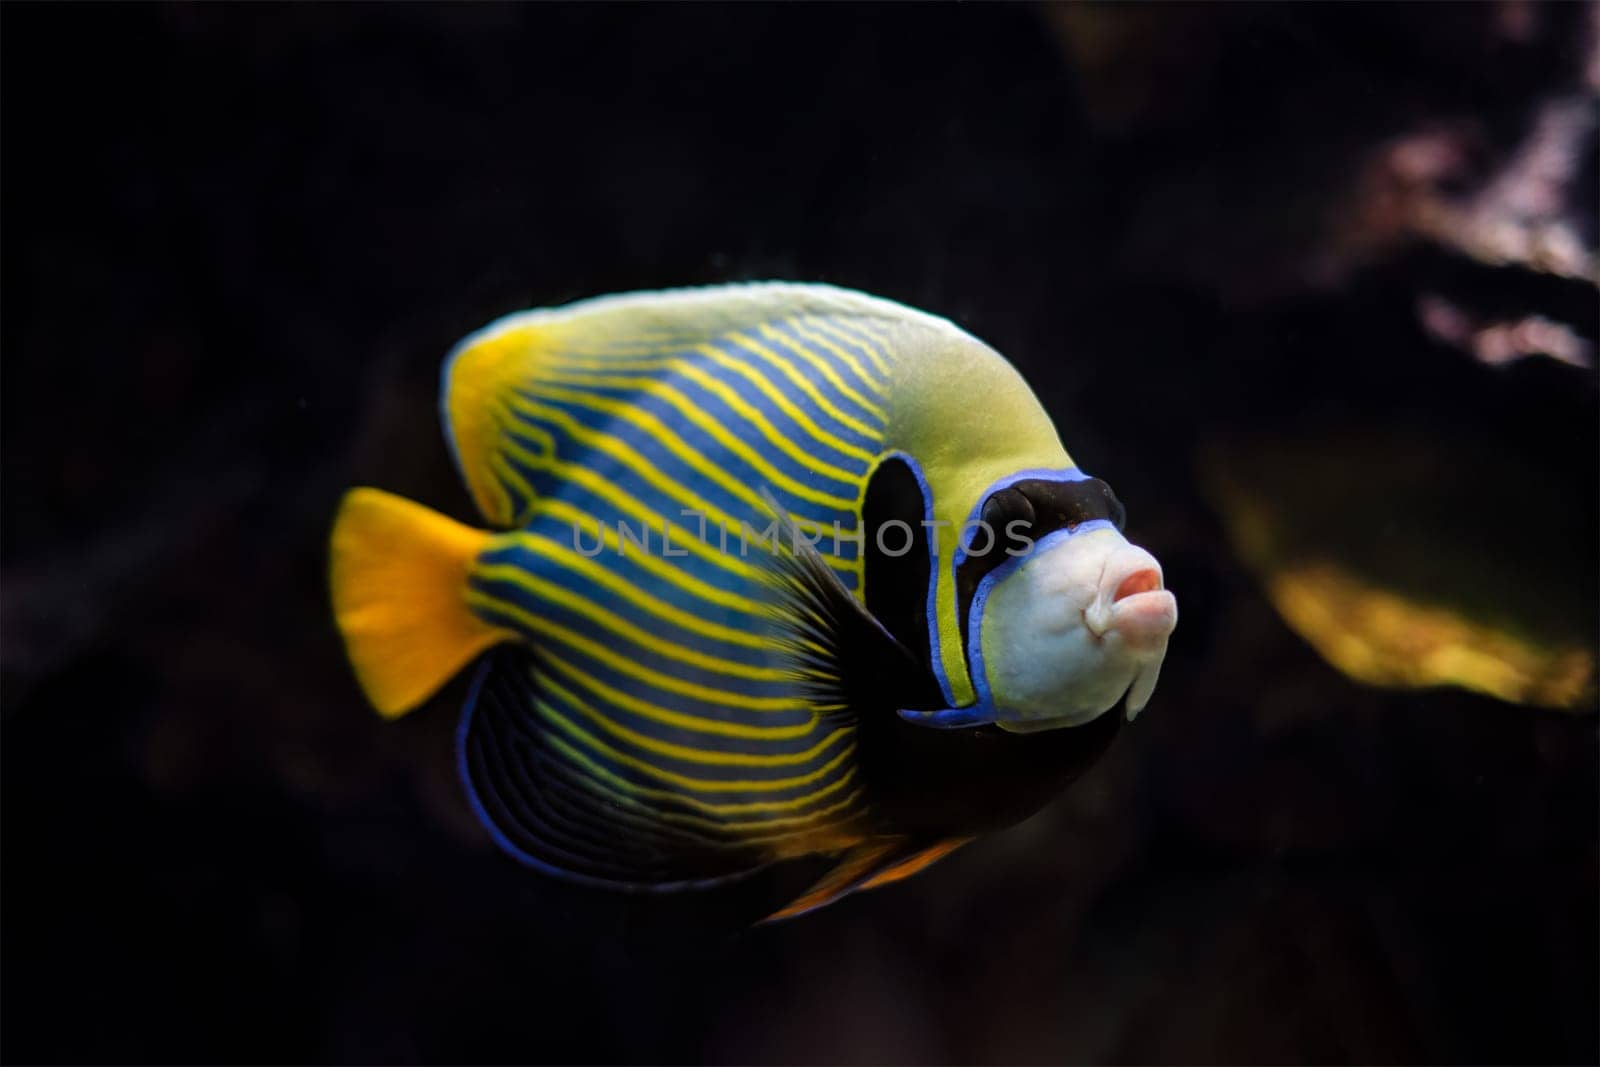 Emperor angelfish Pomacanthus imperator fish underwater in sea with corals in background